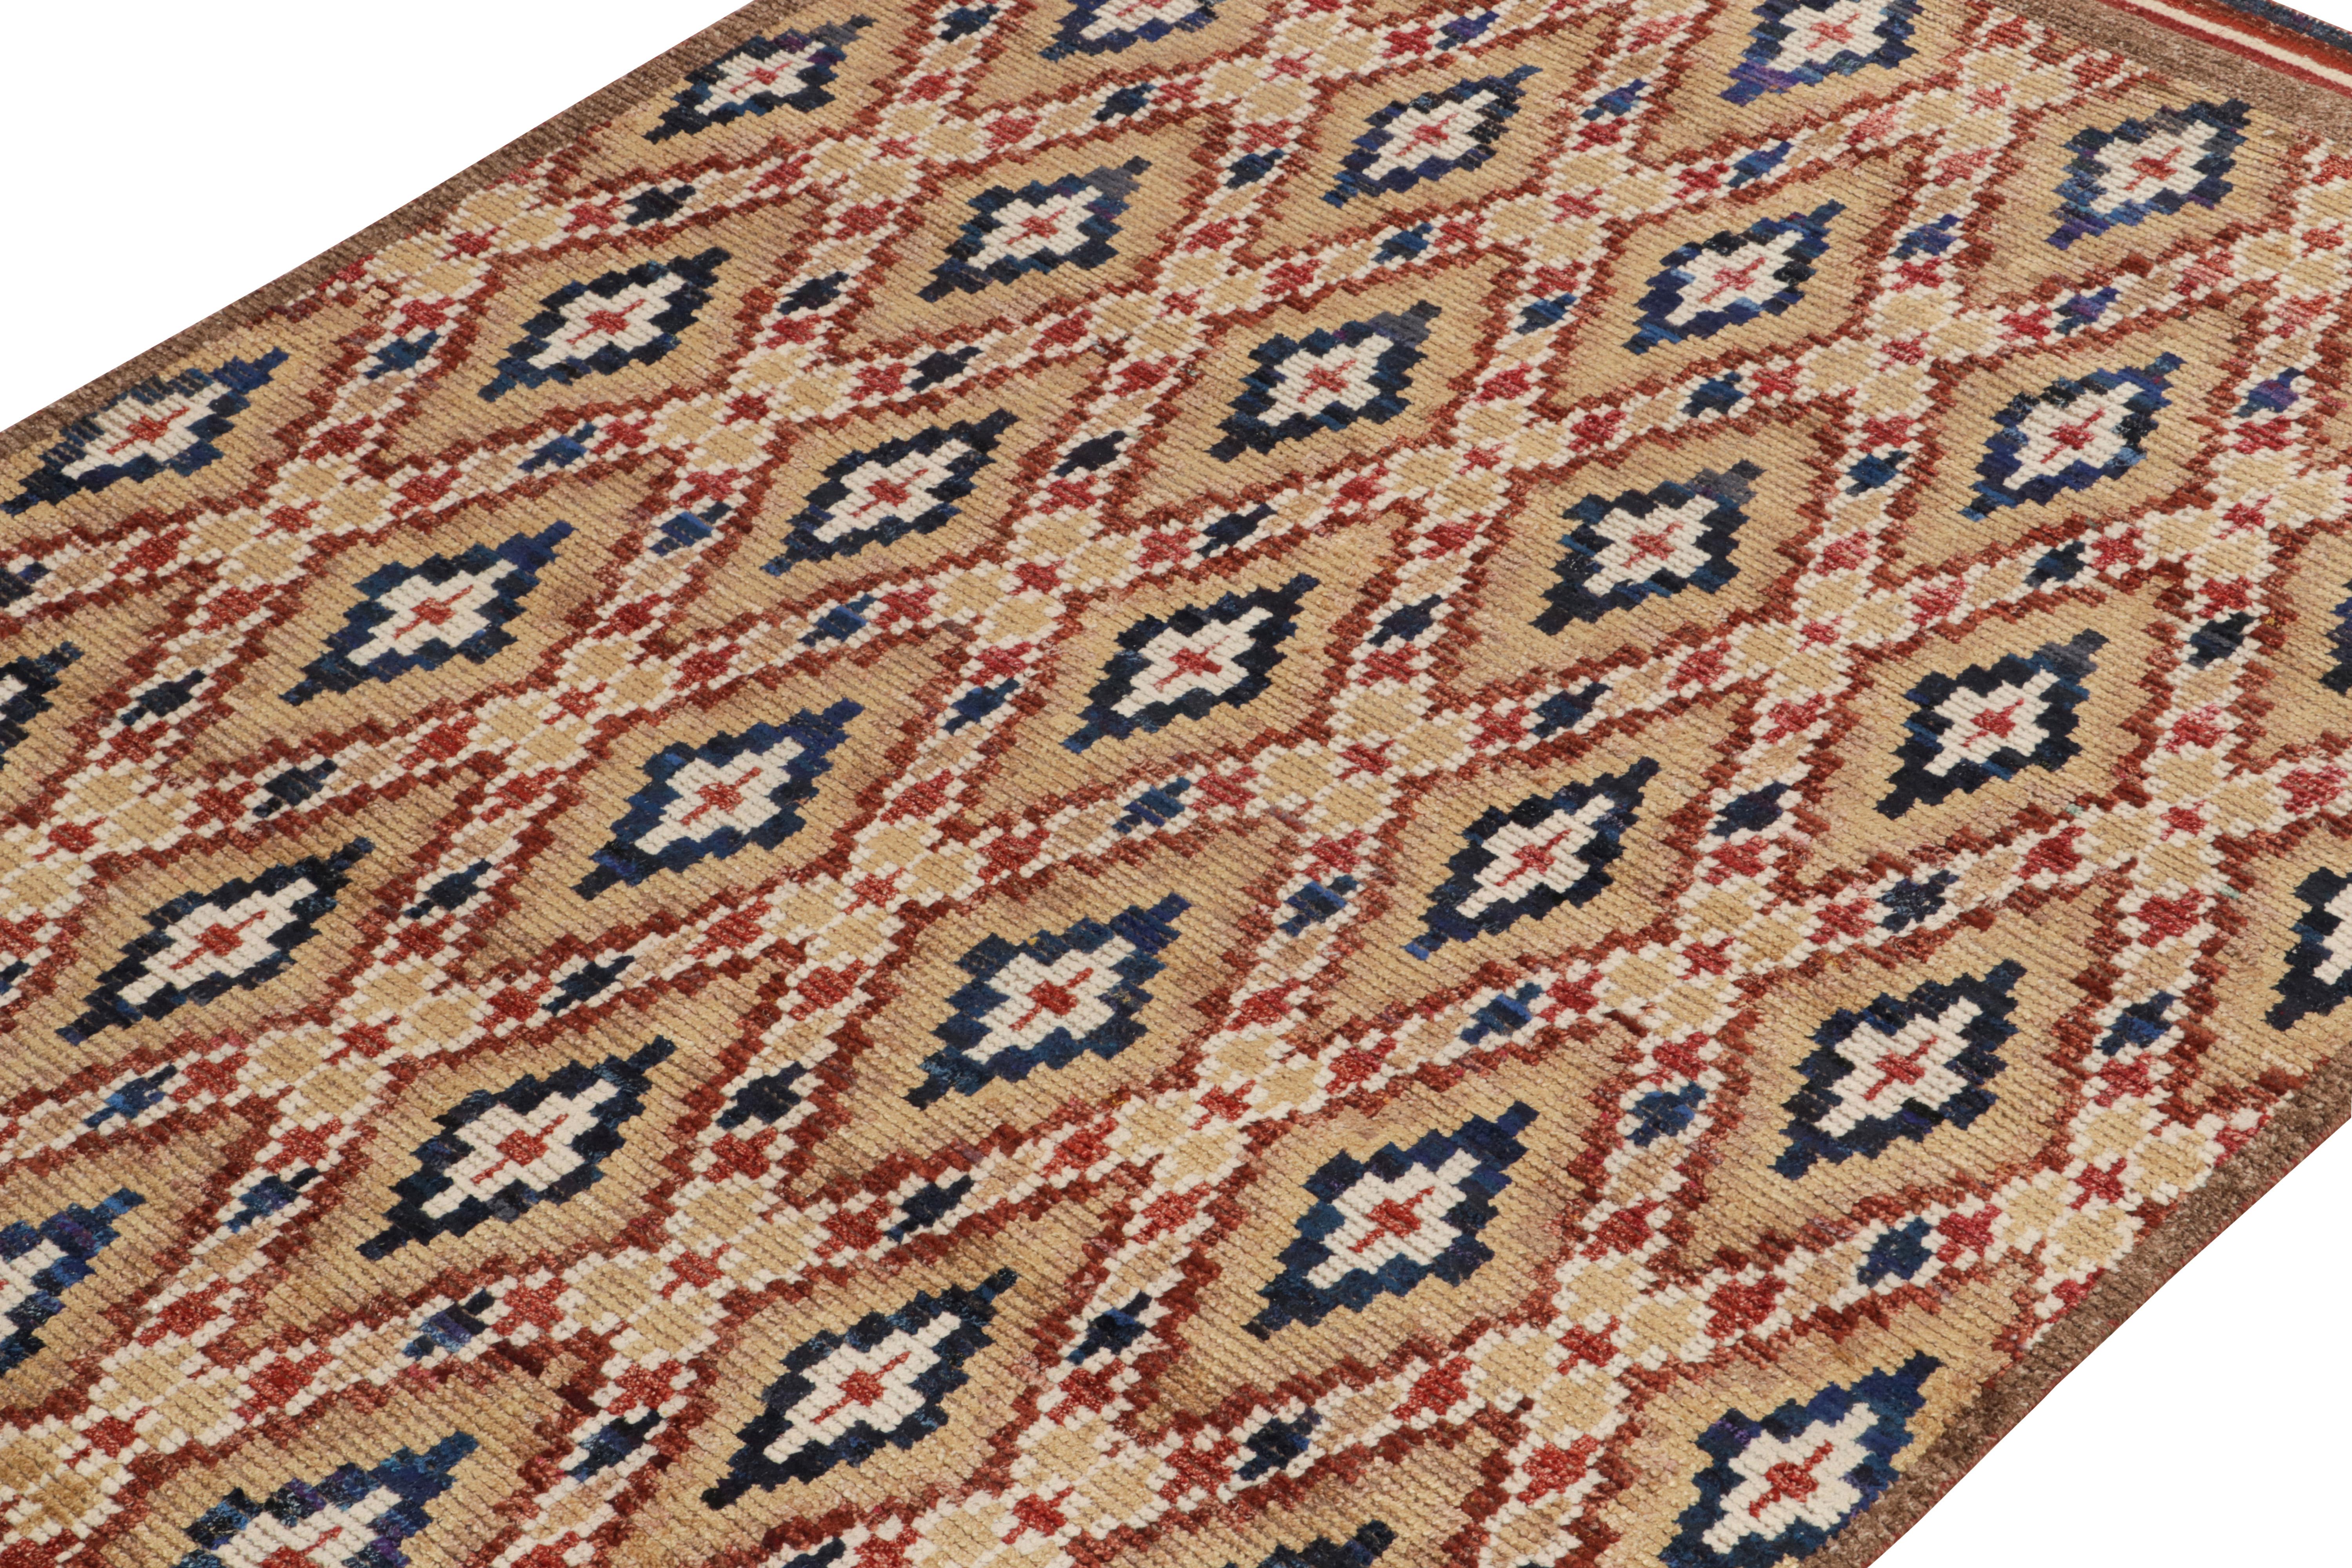 Indian Rug & Kilim's Moroccan Style Rug in Beige-Brown, Red and Blue Diamond Patterns For Sale